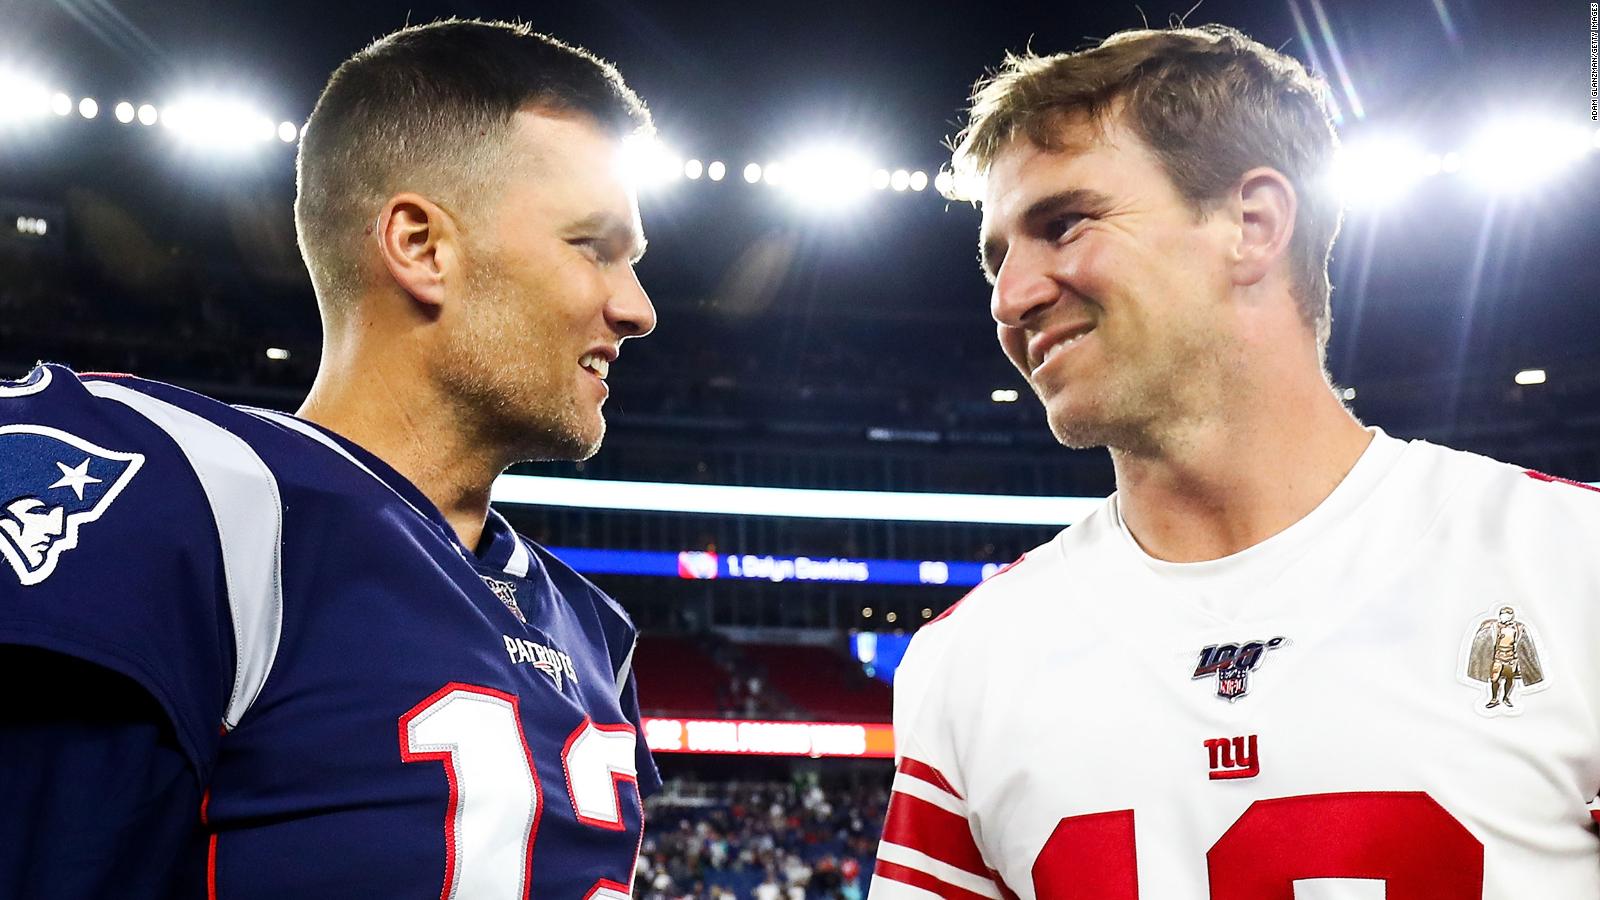 Eli Manning joined Twitter, and was immediately made fun of by Tom